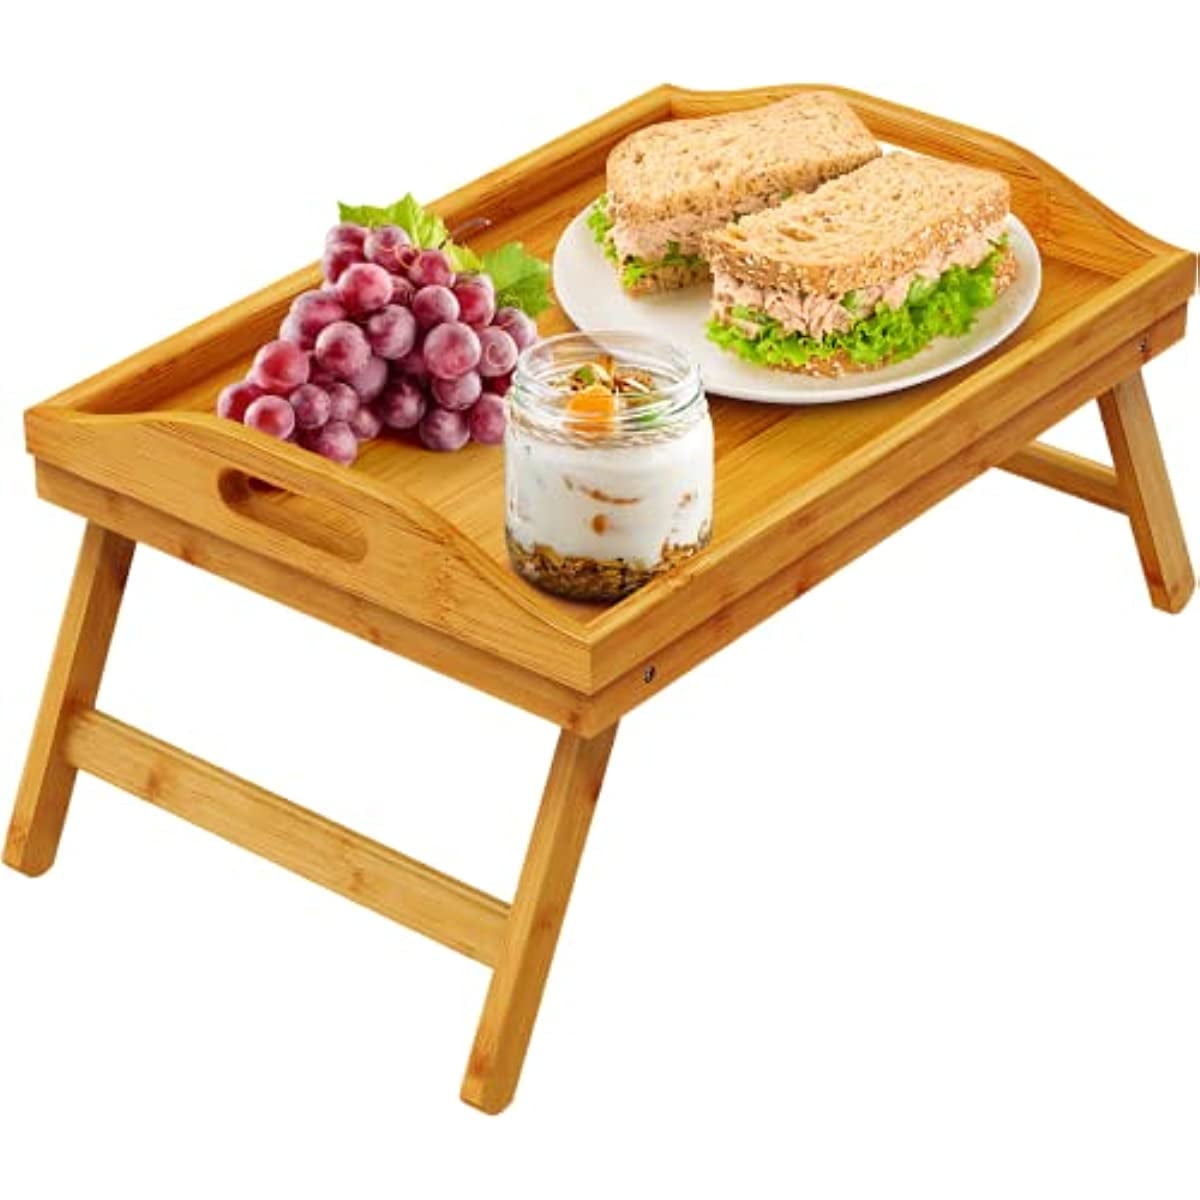 Bamboo Serving Tray, Dinner Tray with Phone Stand, Food Trays for Eating on  Couch, Bamboo Serving Trays Used in Living Room Bedroom Kitchen